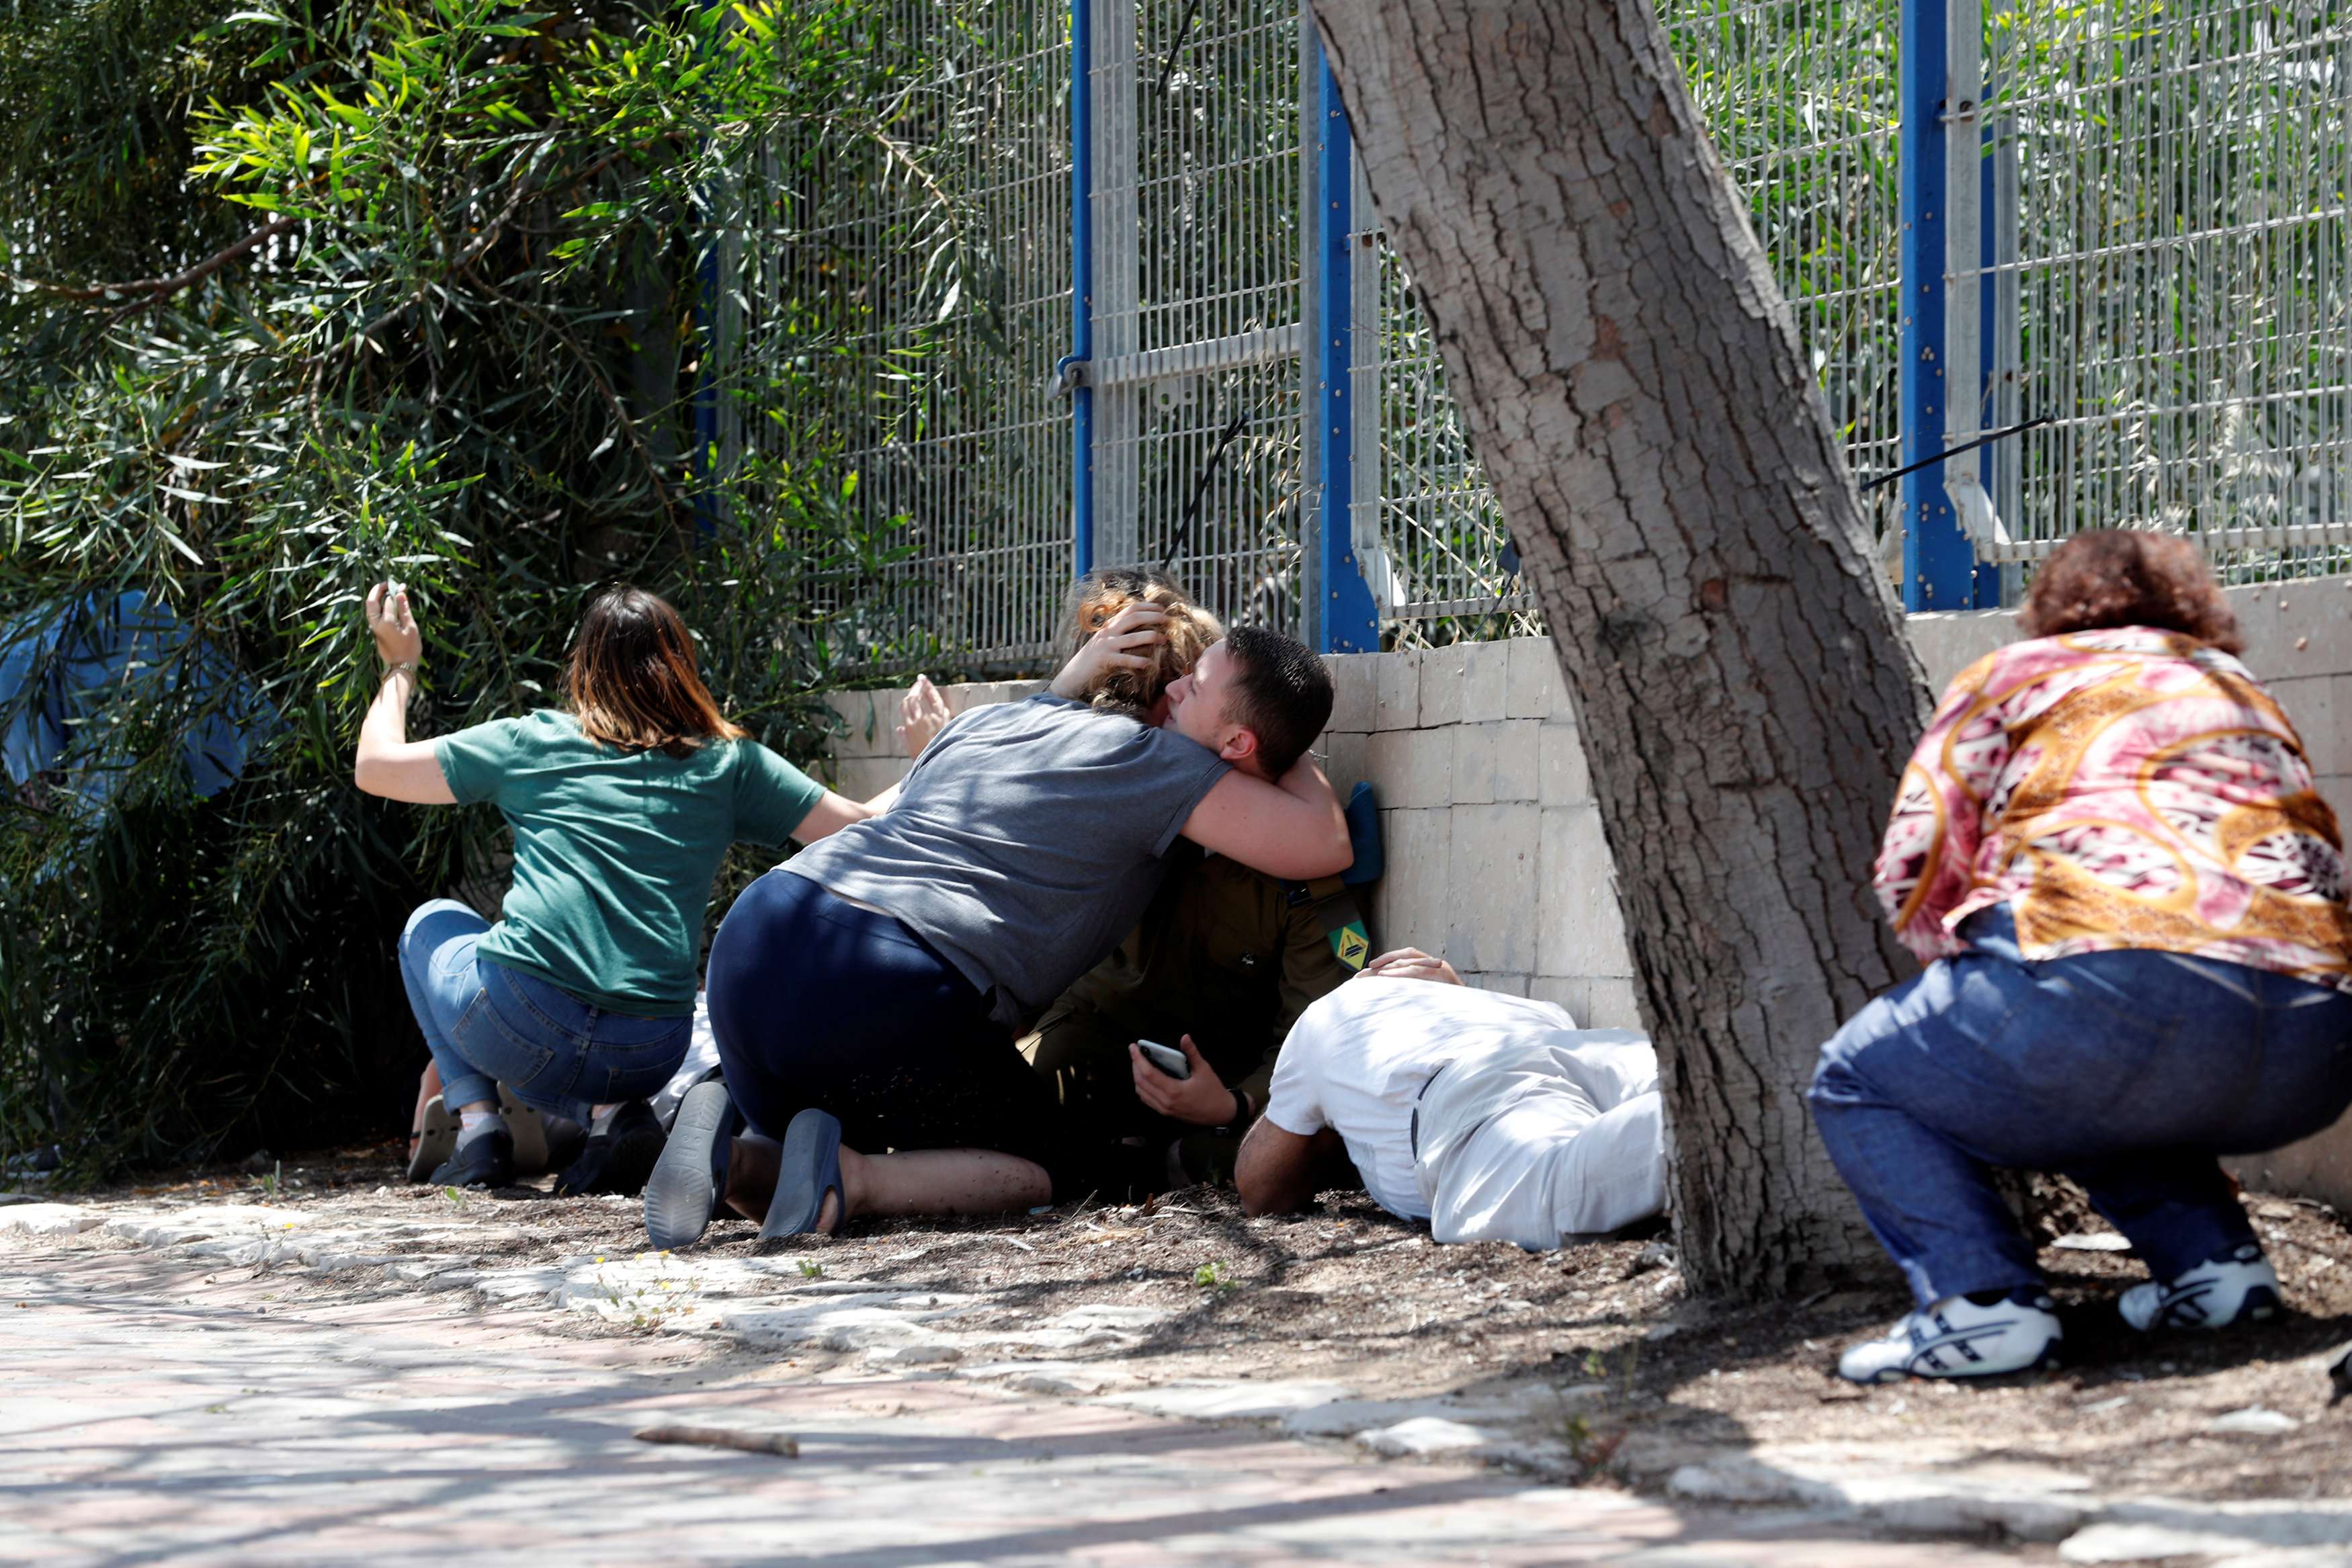 Israelis take cover as they hear sirens warning of incoming rockets from Gaza, during cross-border hostilities, in the southern Israeli city of Ashkelon (Reuters)